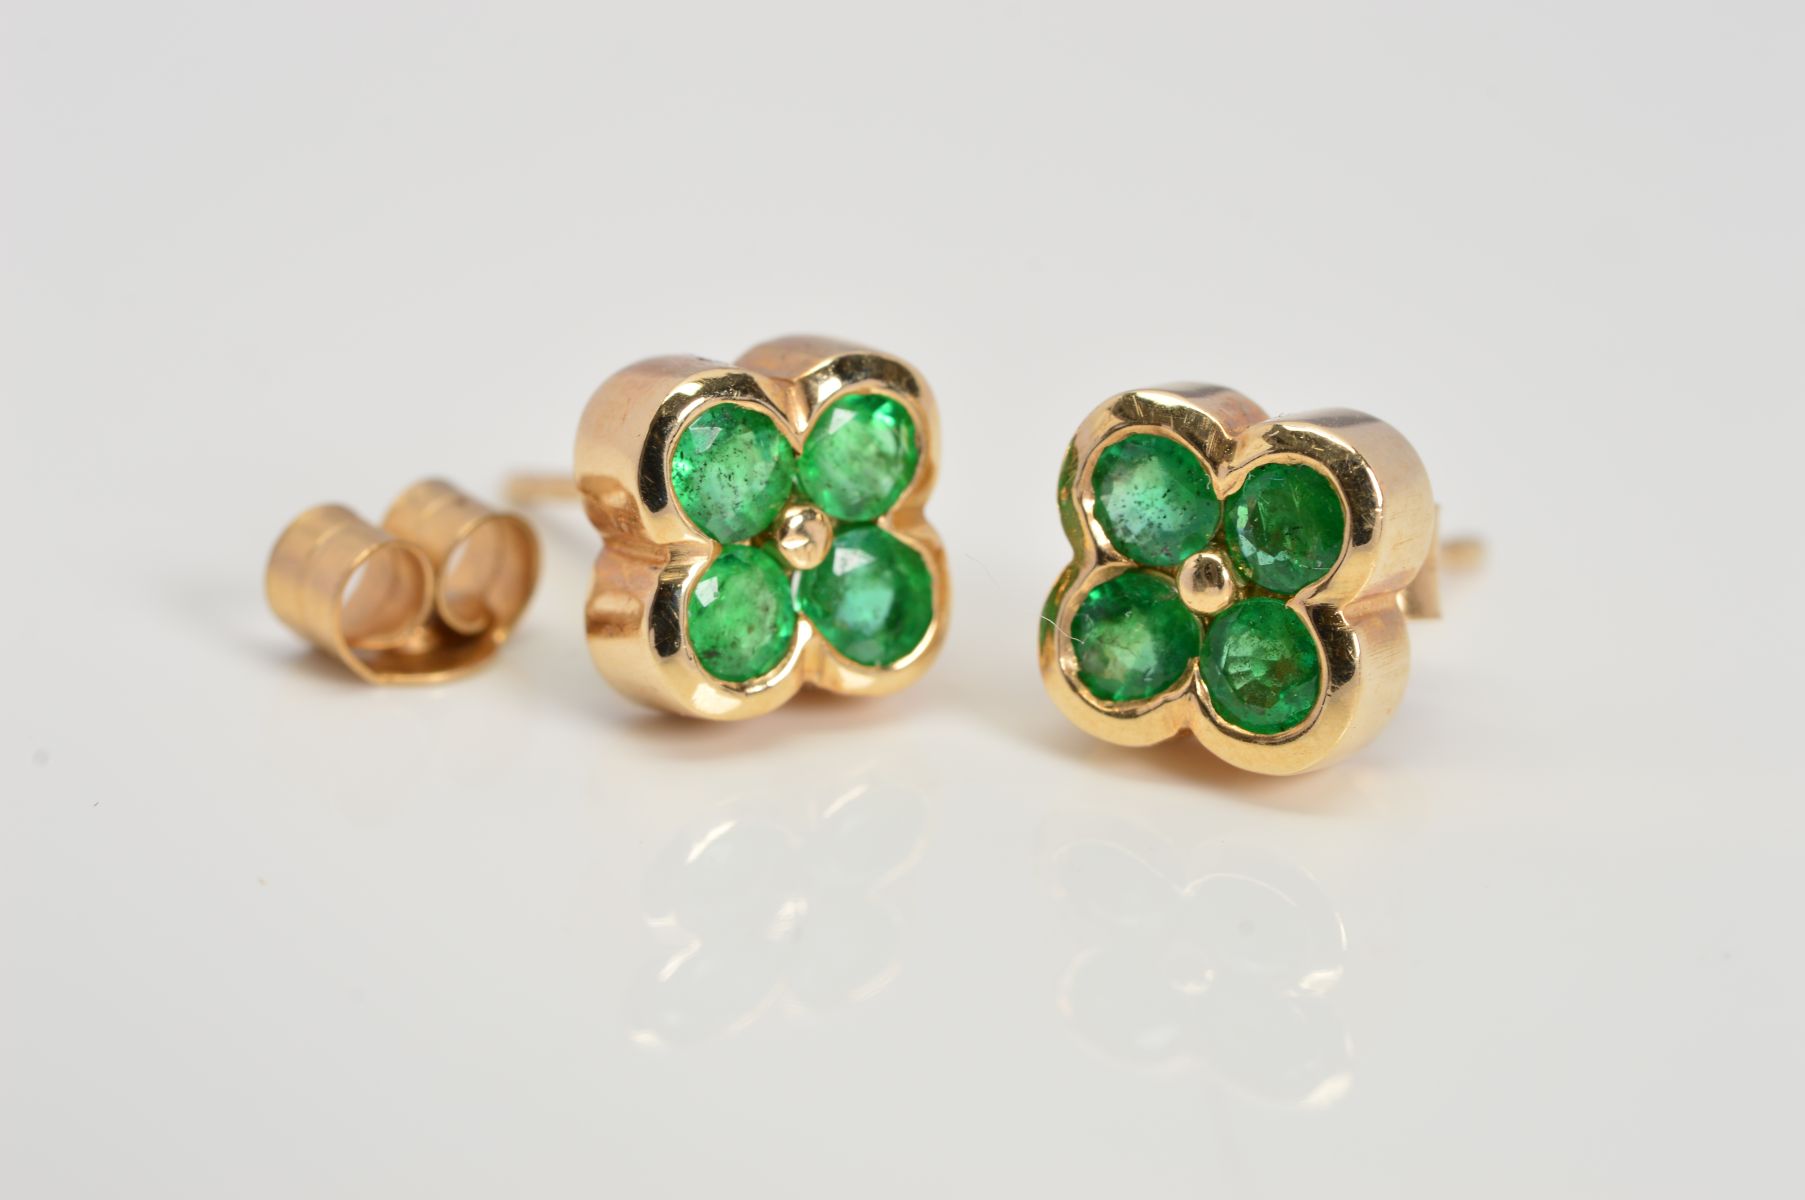 A PAIR OF 9CT GOLD EMERALD STUD EARRINGS designed as a floral cluster of four circular emeralds